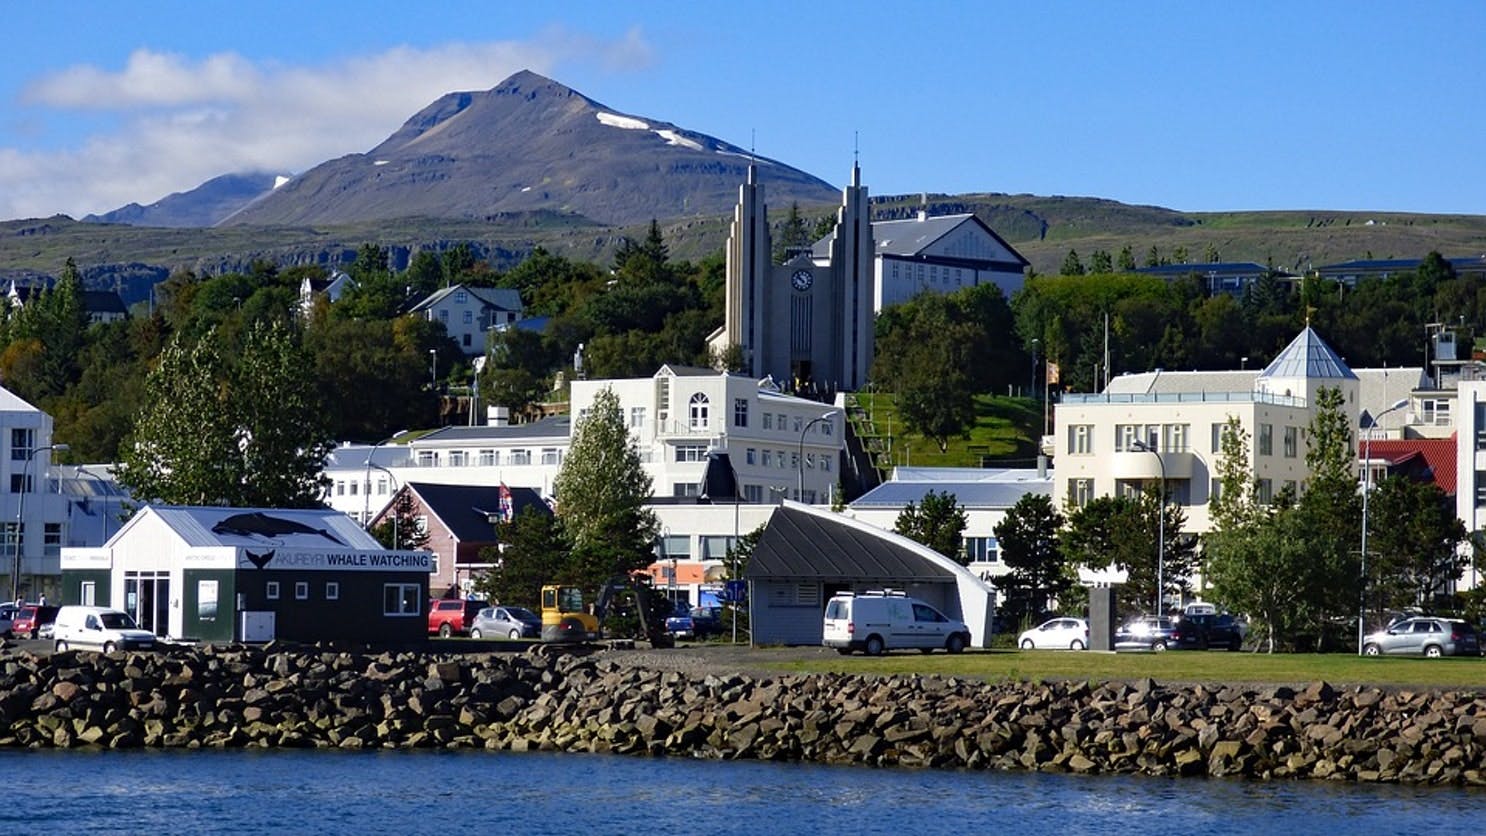 Akureyri, the unofficial capital of Iceland's North, viewd from its harbour.